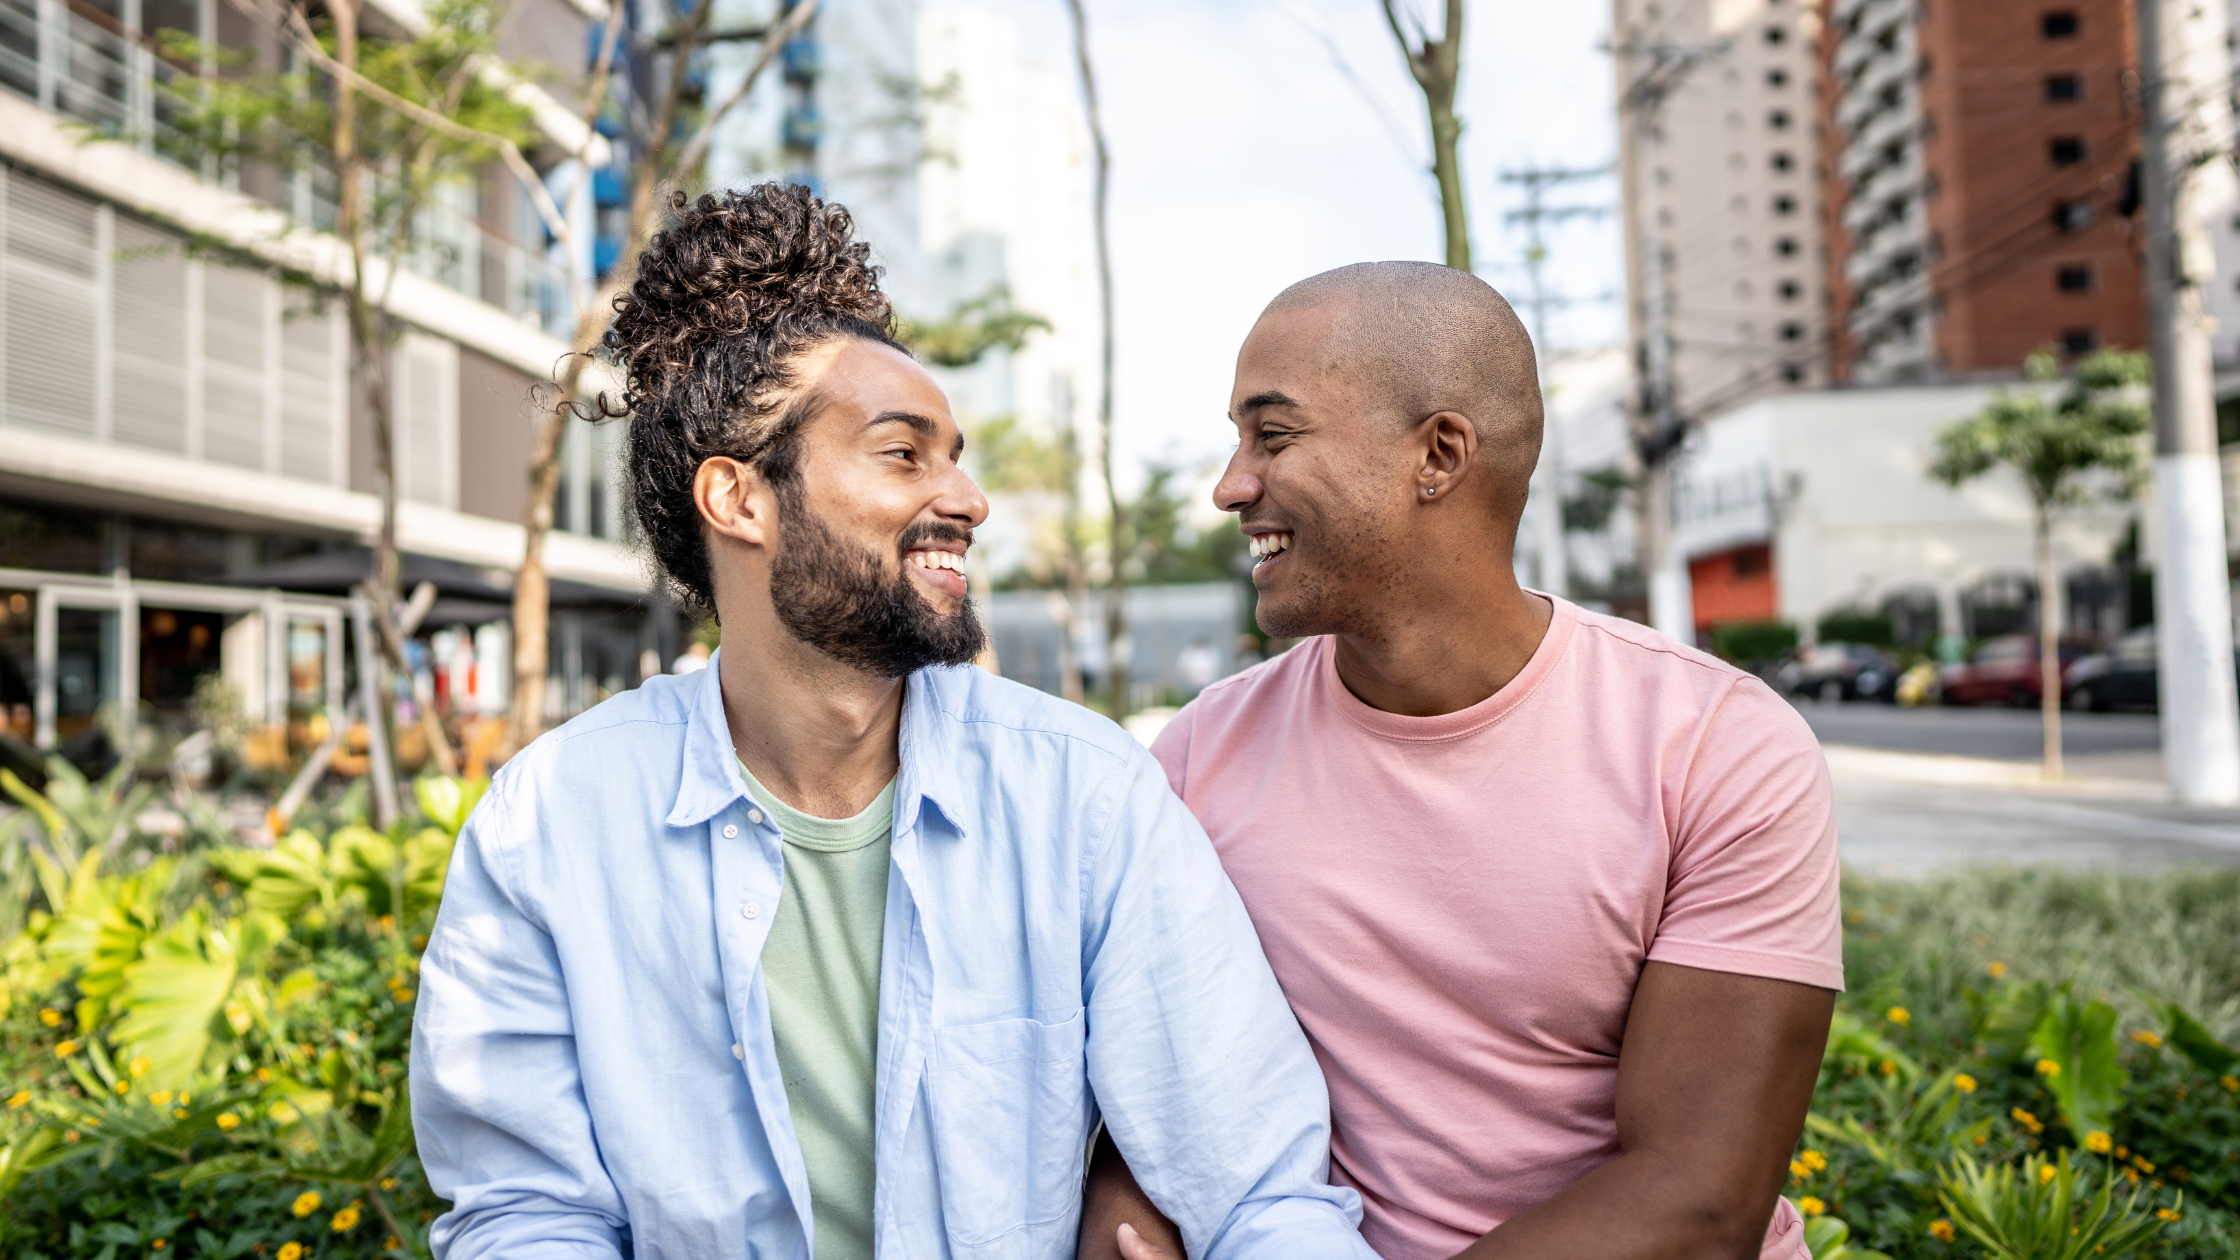 Male black gay couple smiling at each other